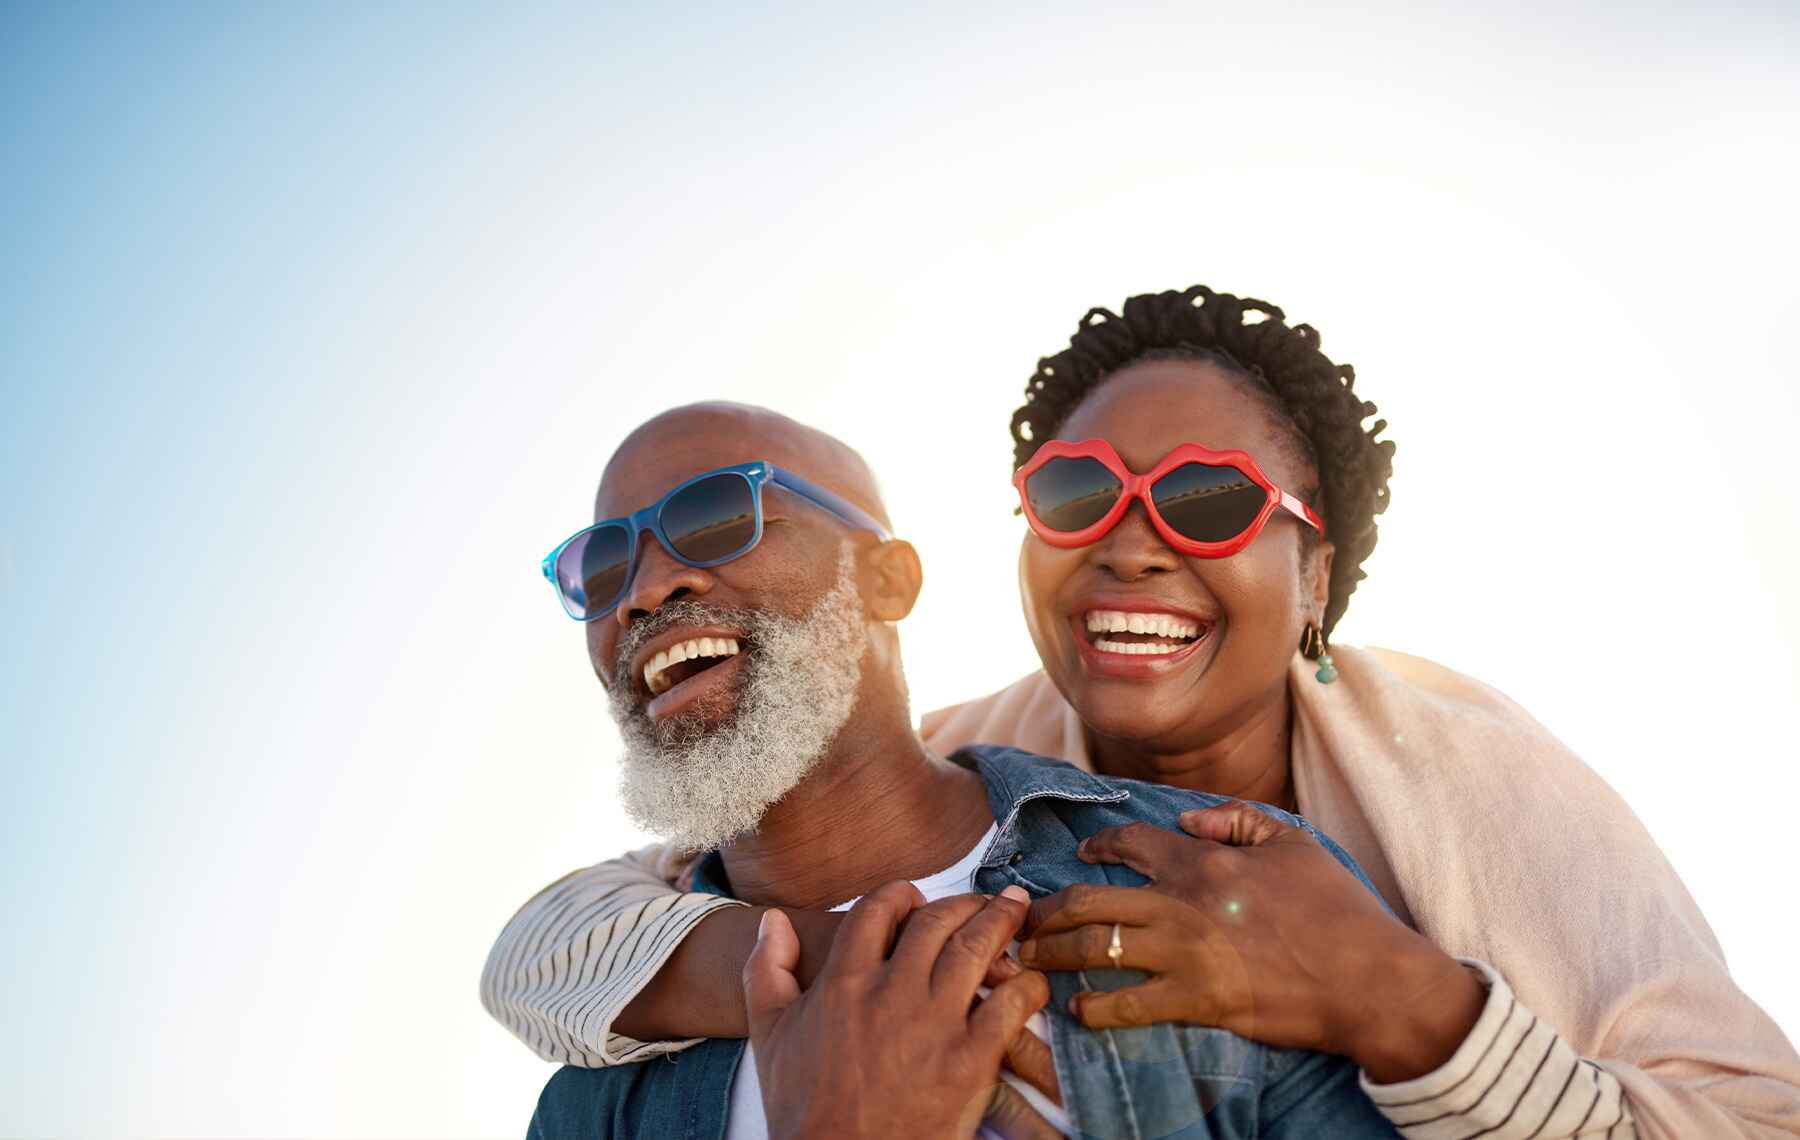 Investing in a pair of UV sunglasses is a simple way to prioritize your eye health throughout the year